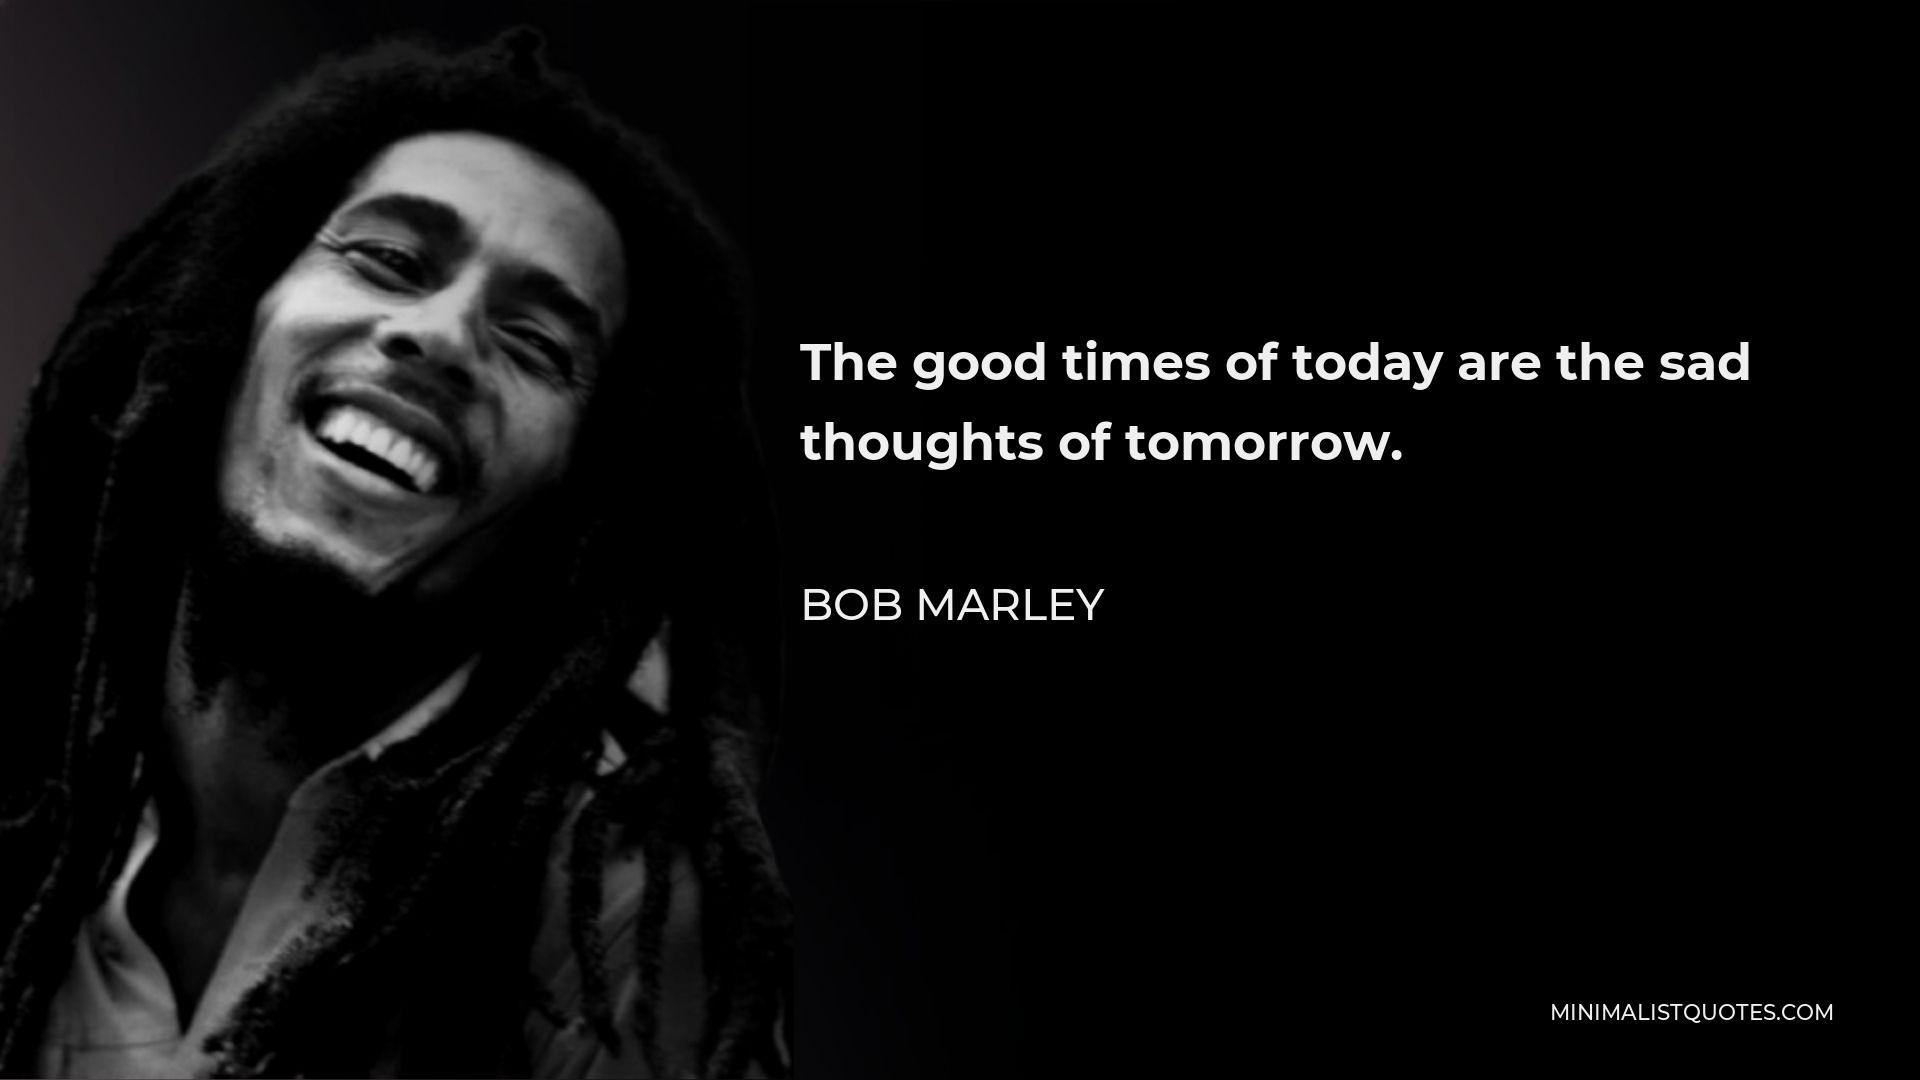 Bob Marley Quote - The good times of today are the sad thoughts of tomorrow.